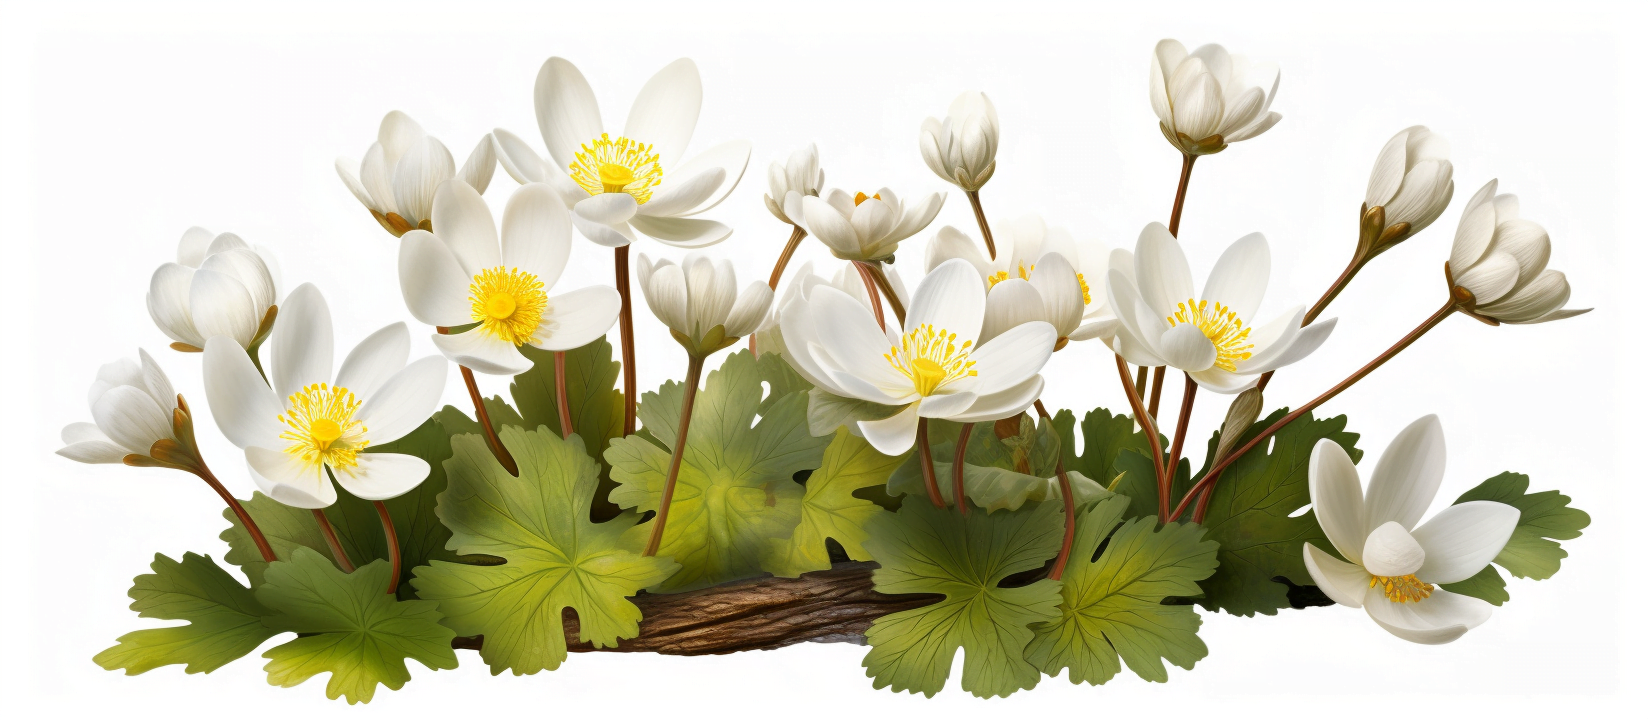 bloodroot plant uses